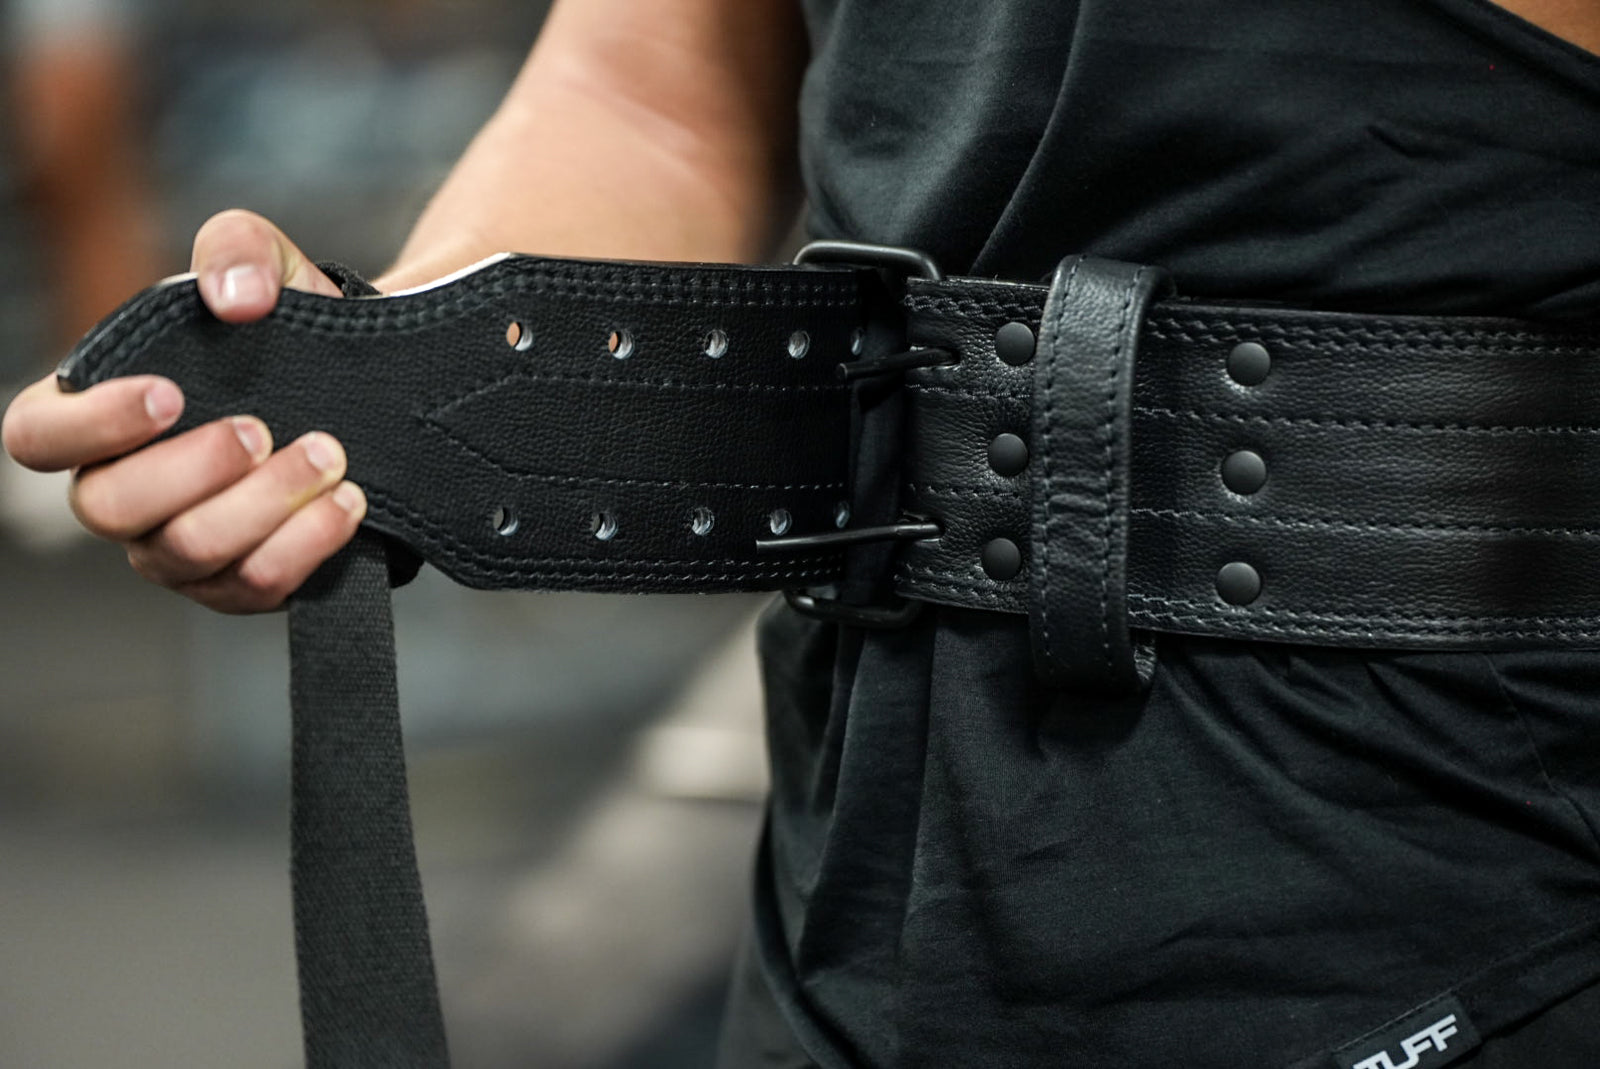 The 6 Best Weightlifting Belts For CrossFit & Weight Training - WillPower  Strength & Nutrition